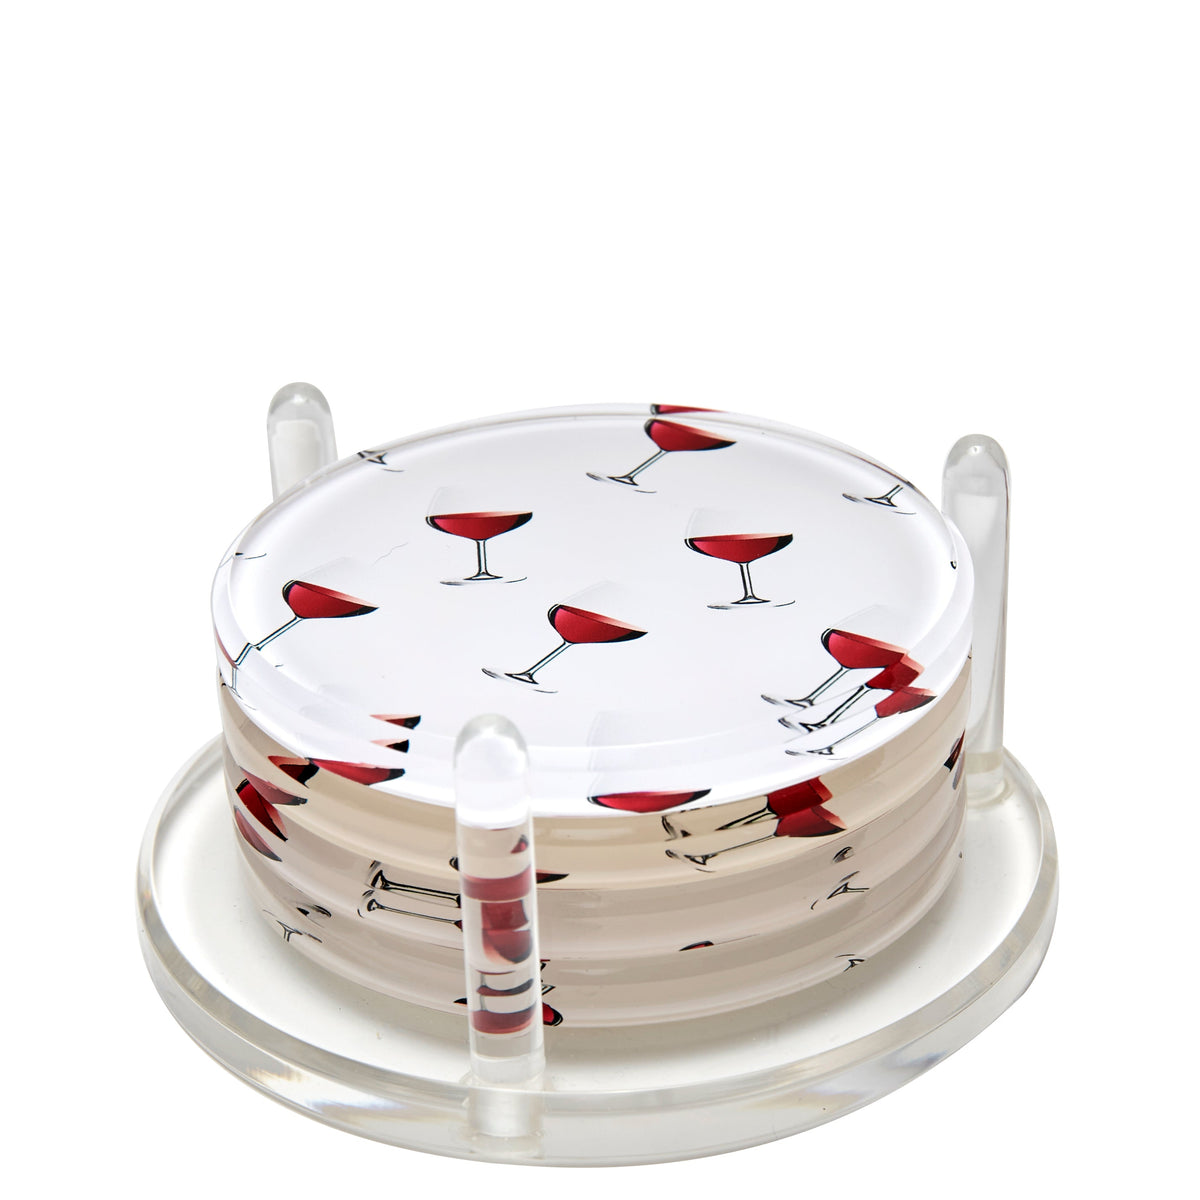 Drink COASTERS Red WINE GLASS 4.25 inches by 4.25 inches